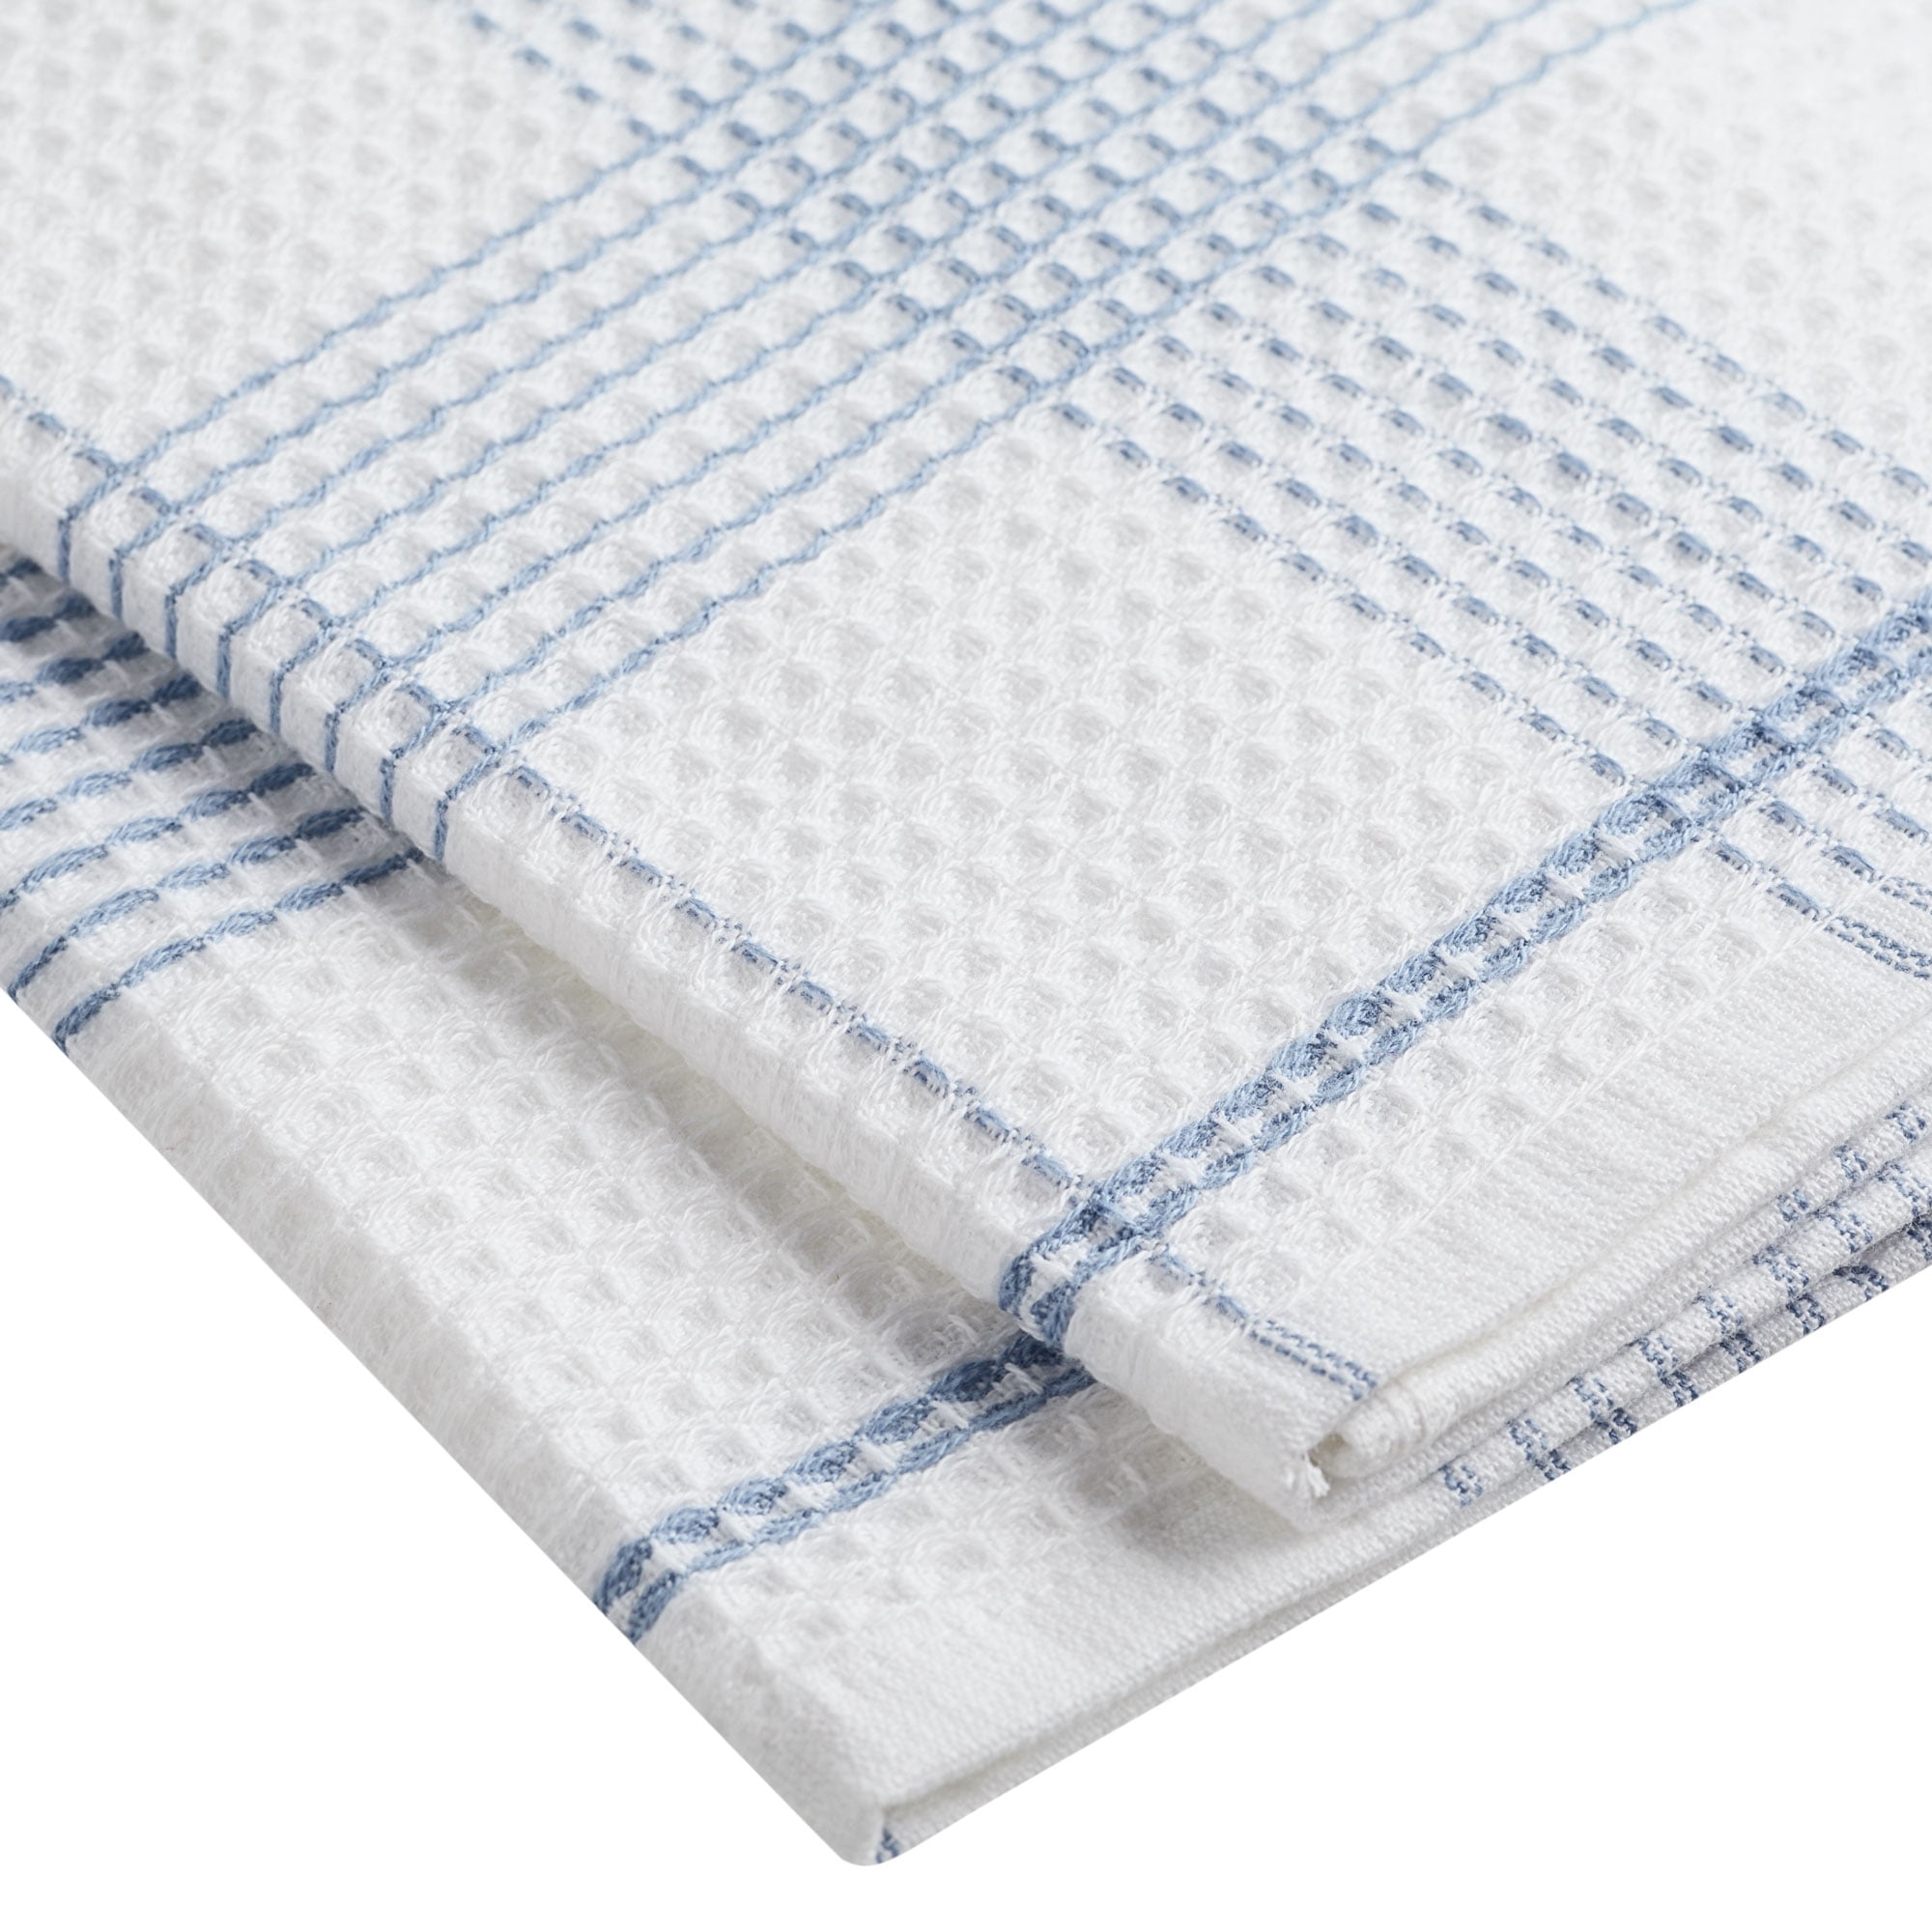  JuliaNa Home and Decor Waffle Weave Kitchen Towels, 100%  Cotton, Set of 4 Cloths for Washing Dishes, Kitchen Dish Towels 12x12  Inches, Cream White and Blue : Home & Kitchen